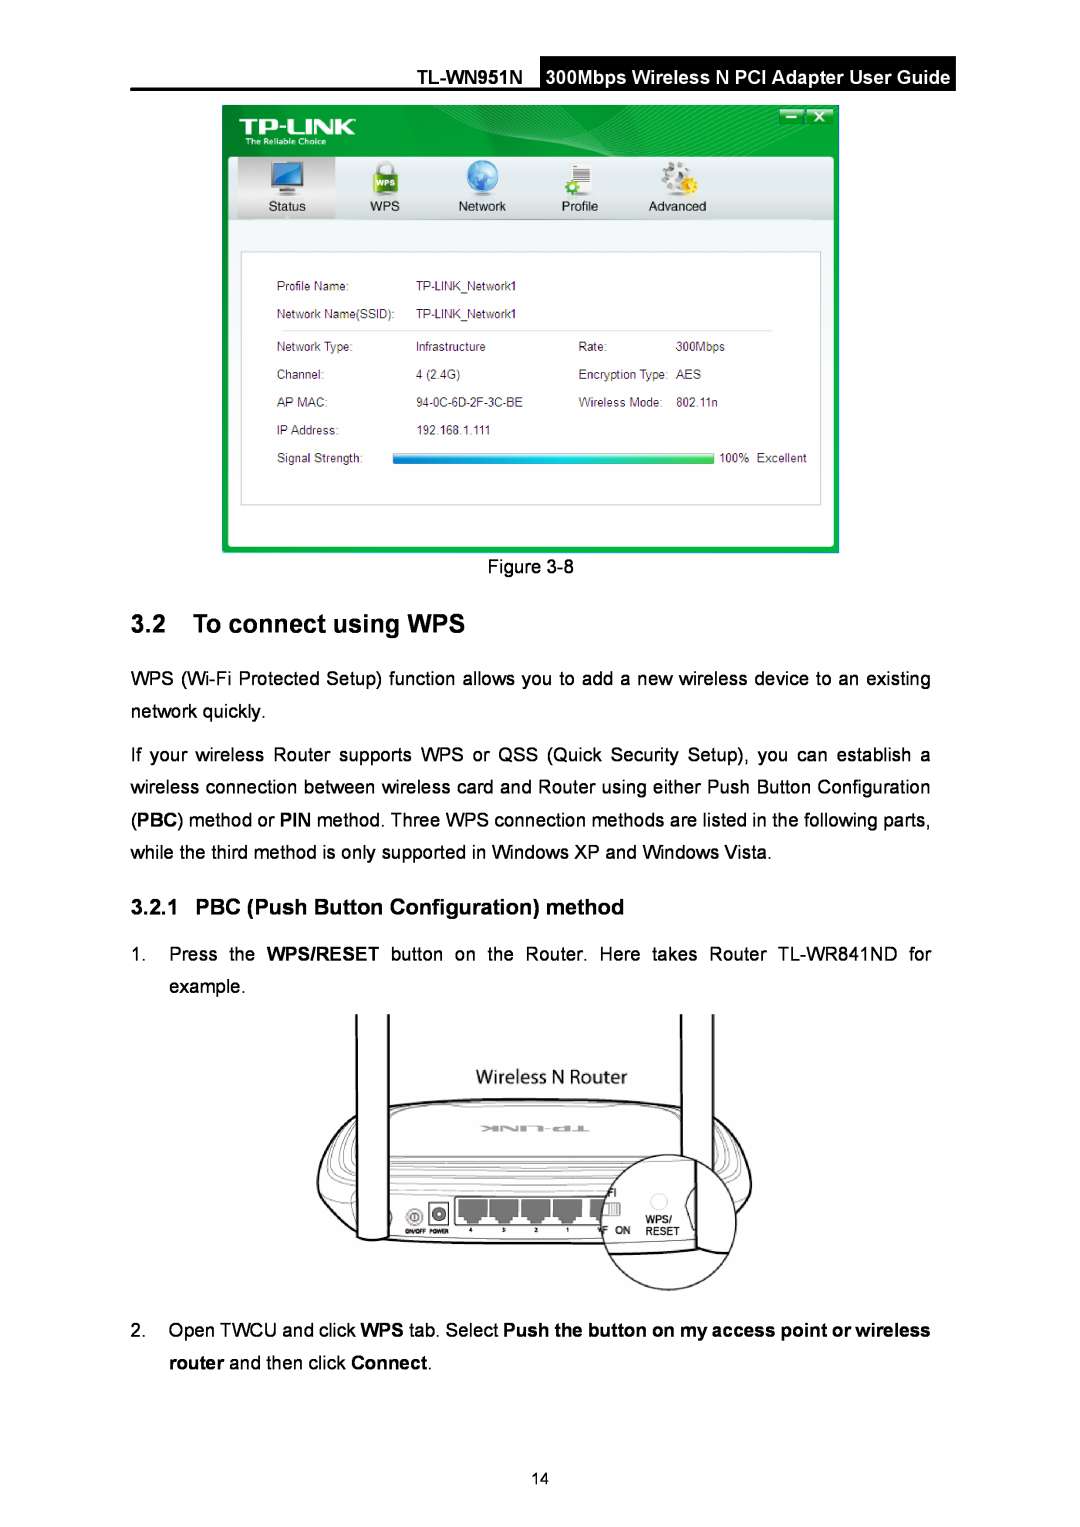 TP-Link TL-WN951N manual To connect using WPS, PBC Push Button Configuration method 